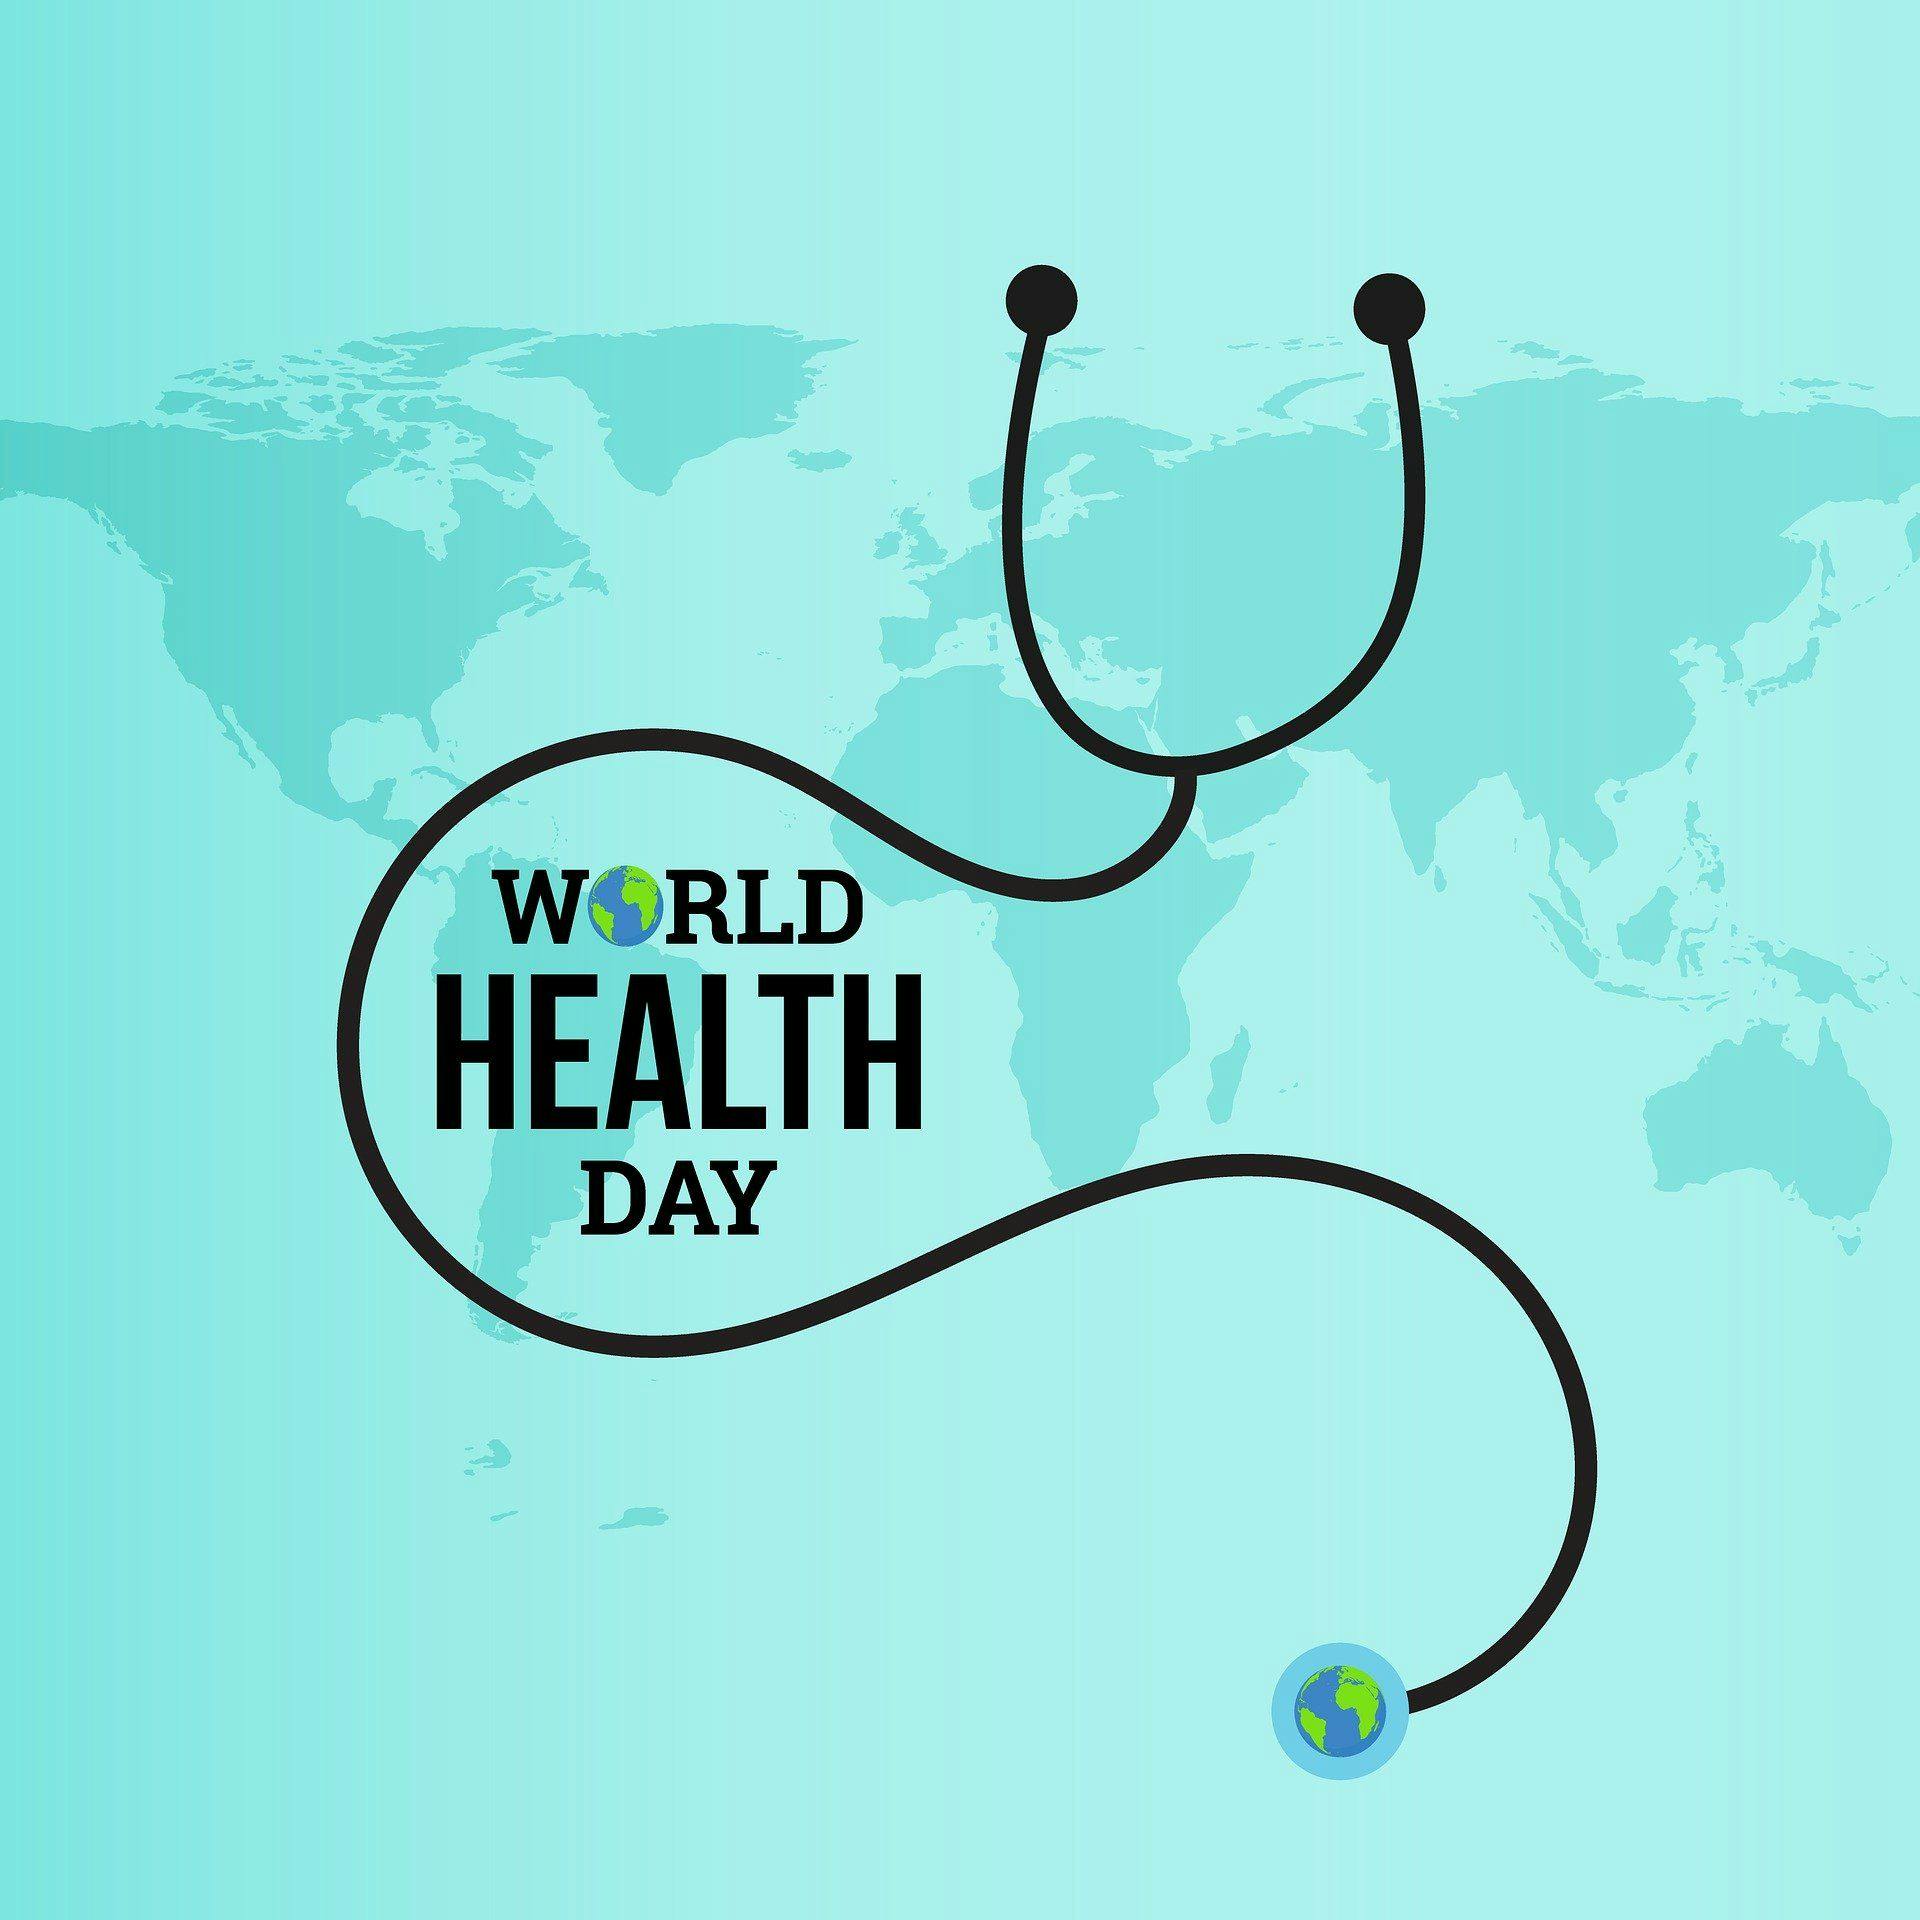 CancerNetwork Honors World Health Day by Looking at Recent Breakthroughs in Cancer Prevention, Screening 